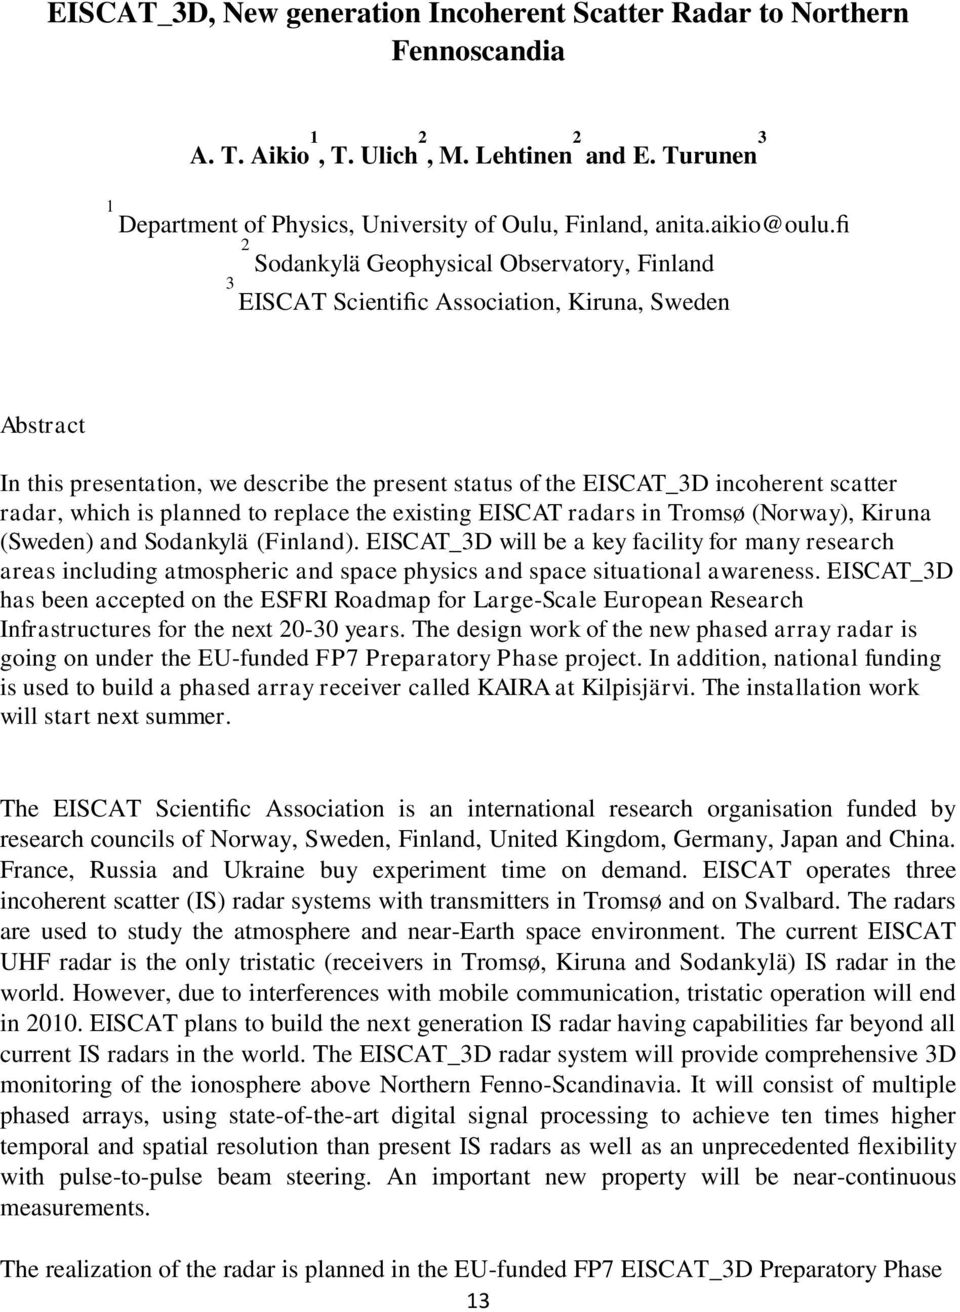 fi 2 Sodankylä Geophysical Observatory, Finland 3 EISCAT Scientific Association, Kiruna, Sweden Abstract In this presentation, we describe the present status of the EISCAT_3D incoherent scatter